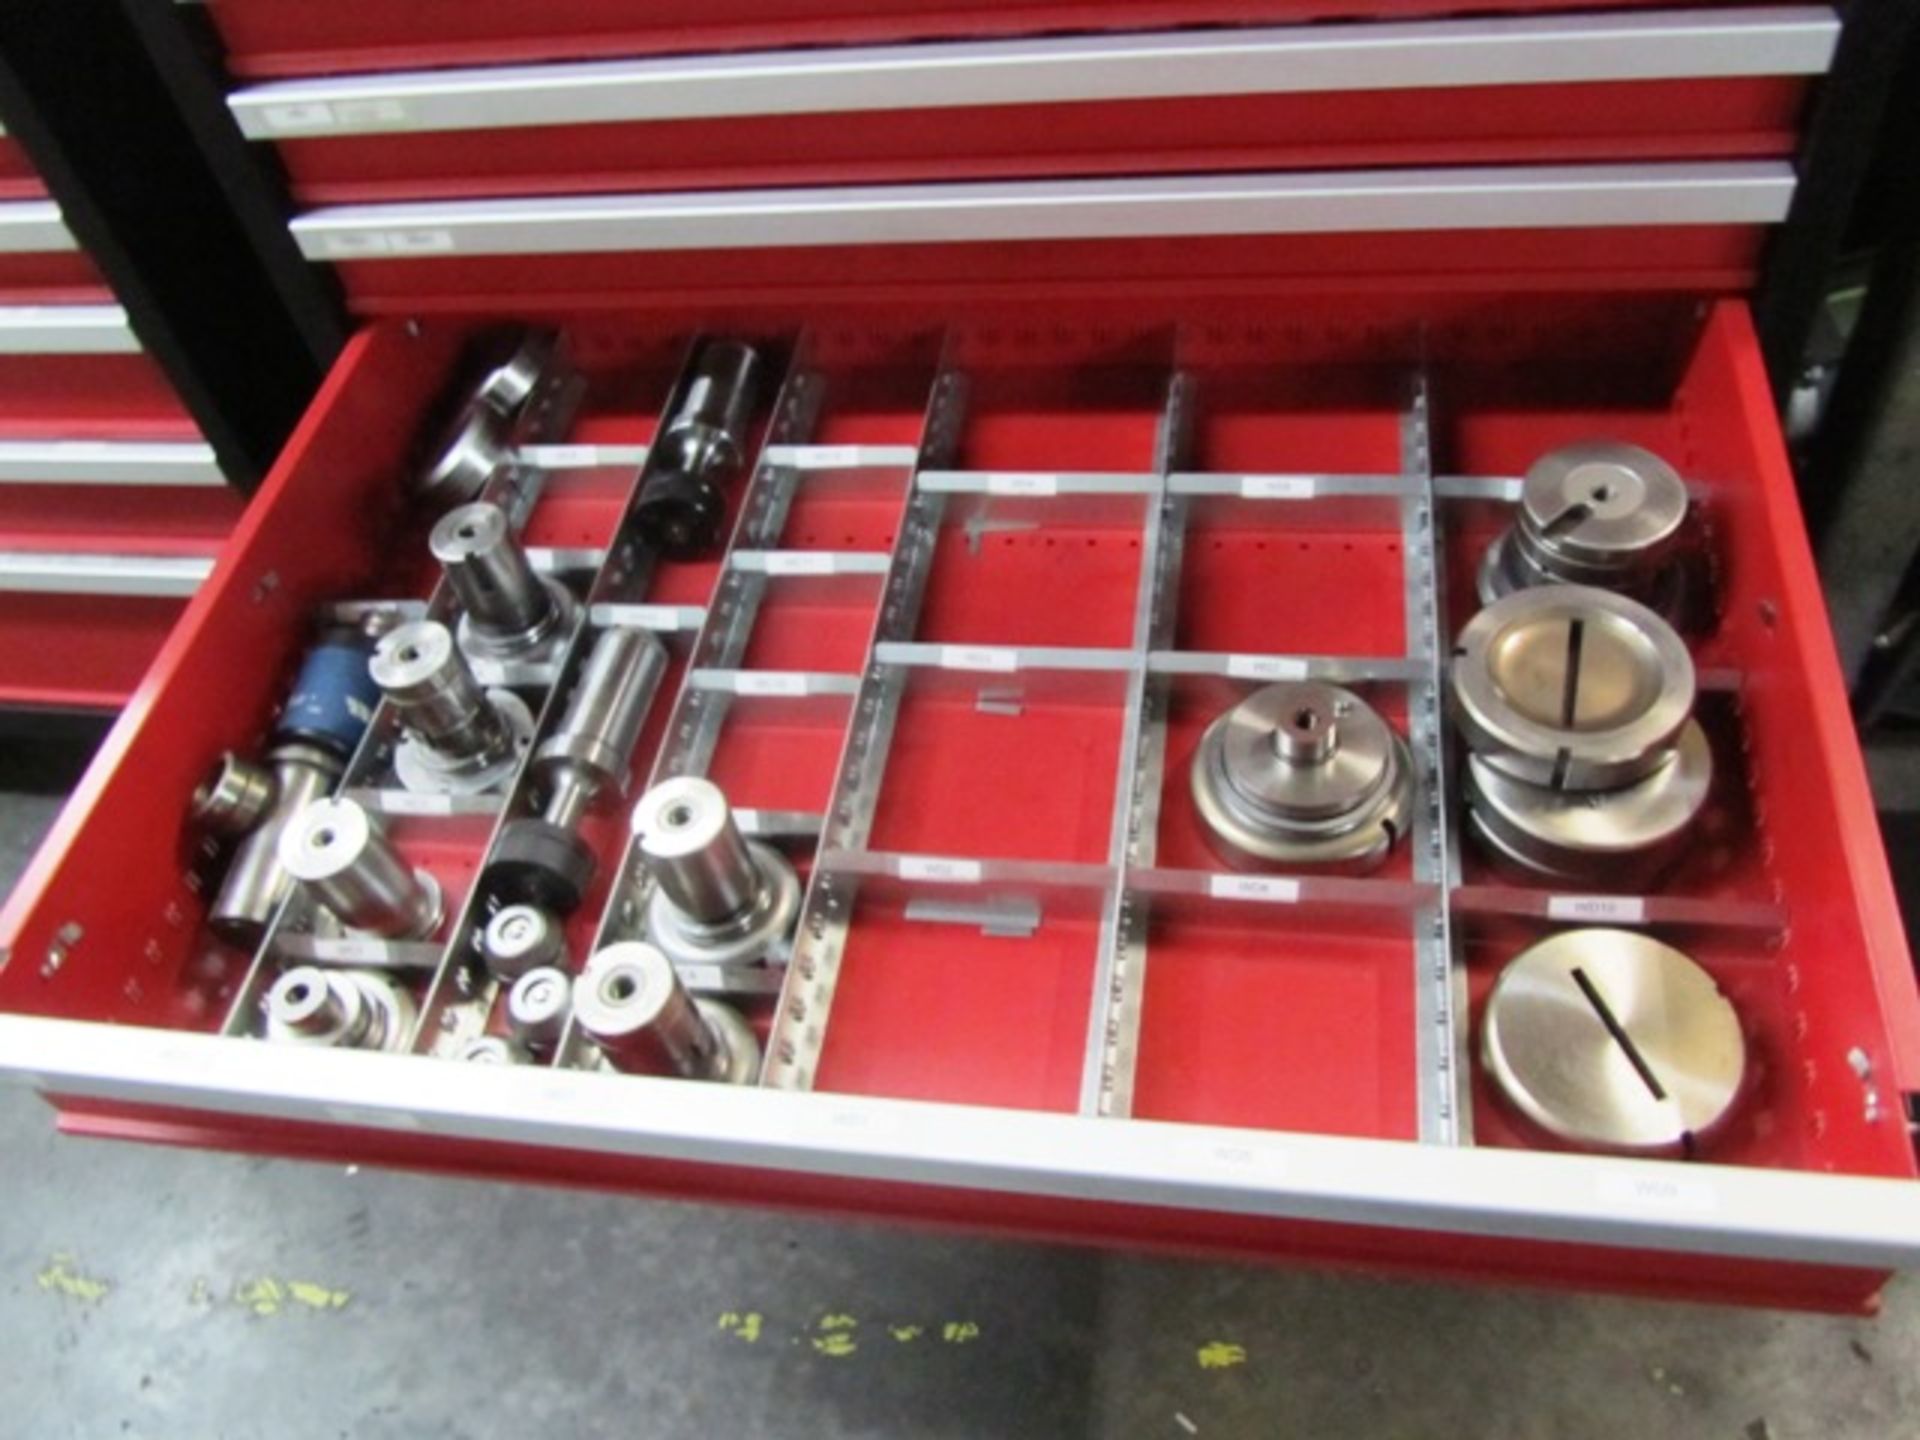 Amada 8 Drawer Portable Tool Cabinet with Turret Punches & Dies - Image 7 of 7